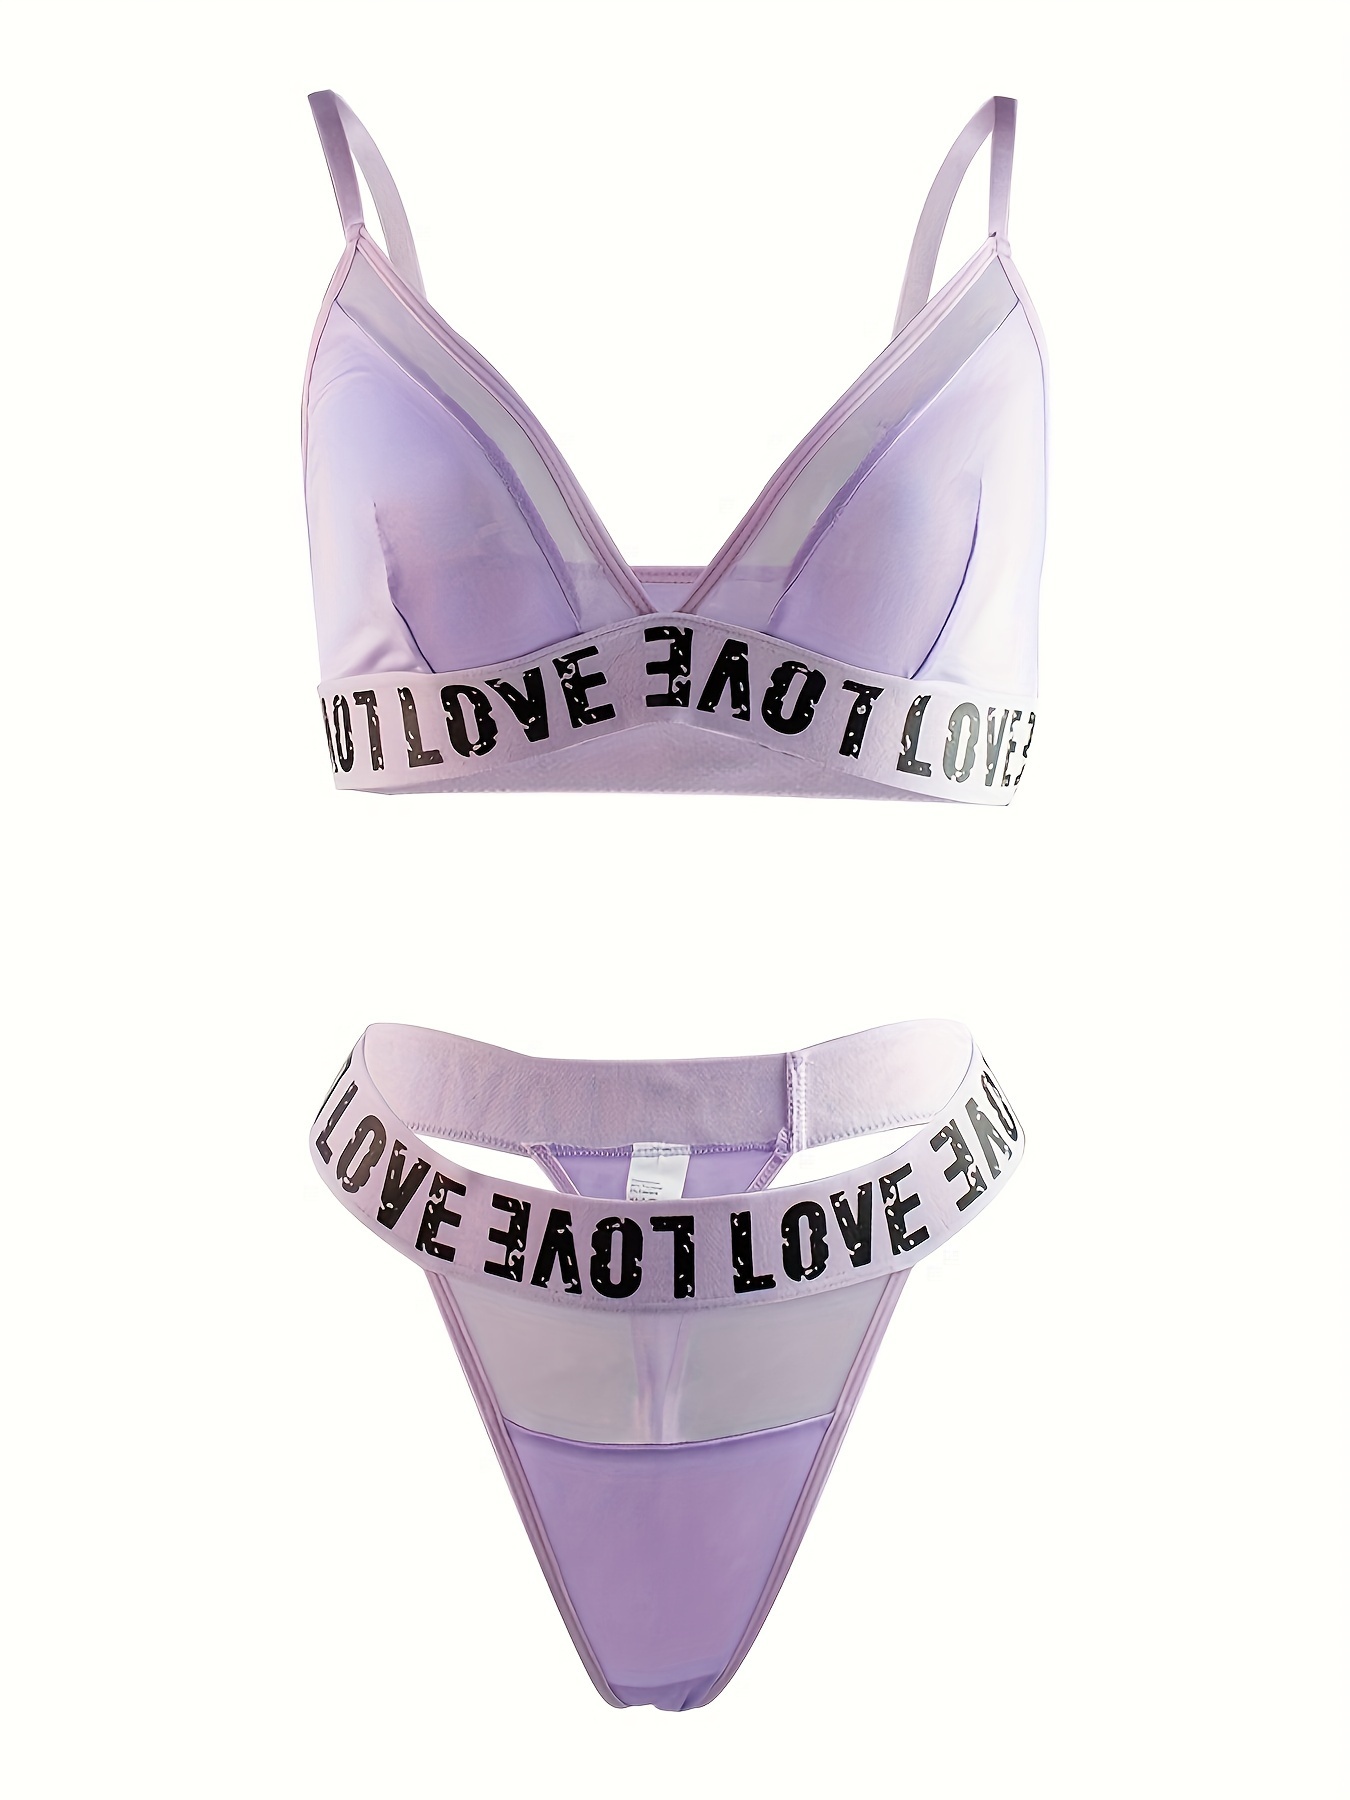 Ladies M Panty and Sports Bra Size 36 Tie Dye Matching Set in Beautiful  Shades of Purple -  Canada